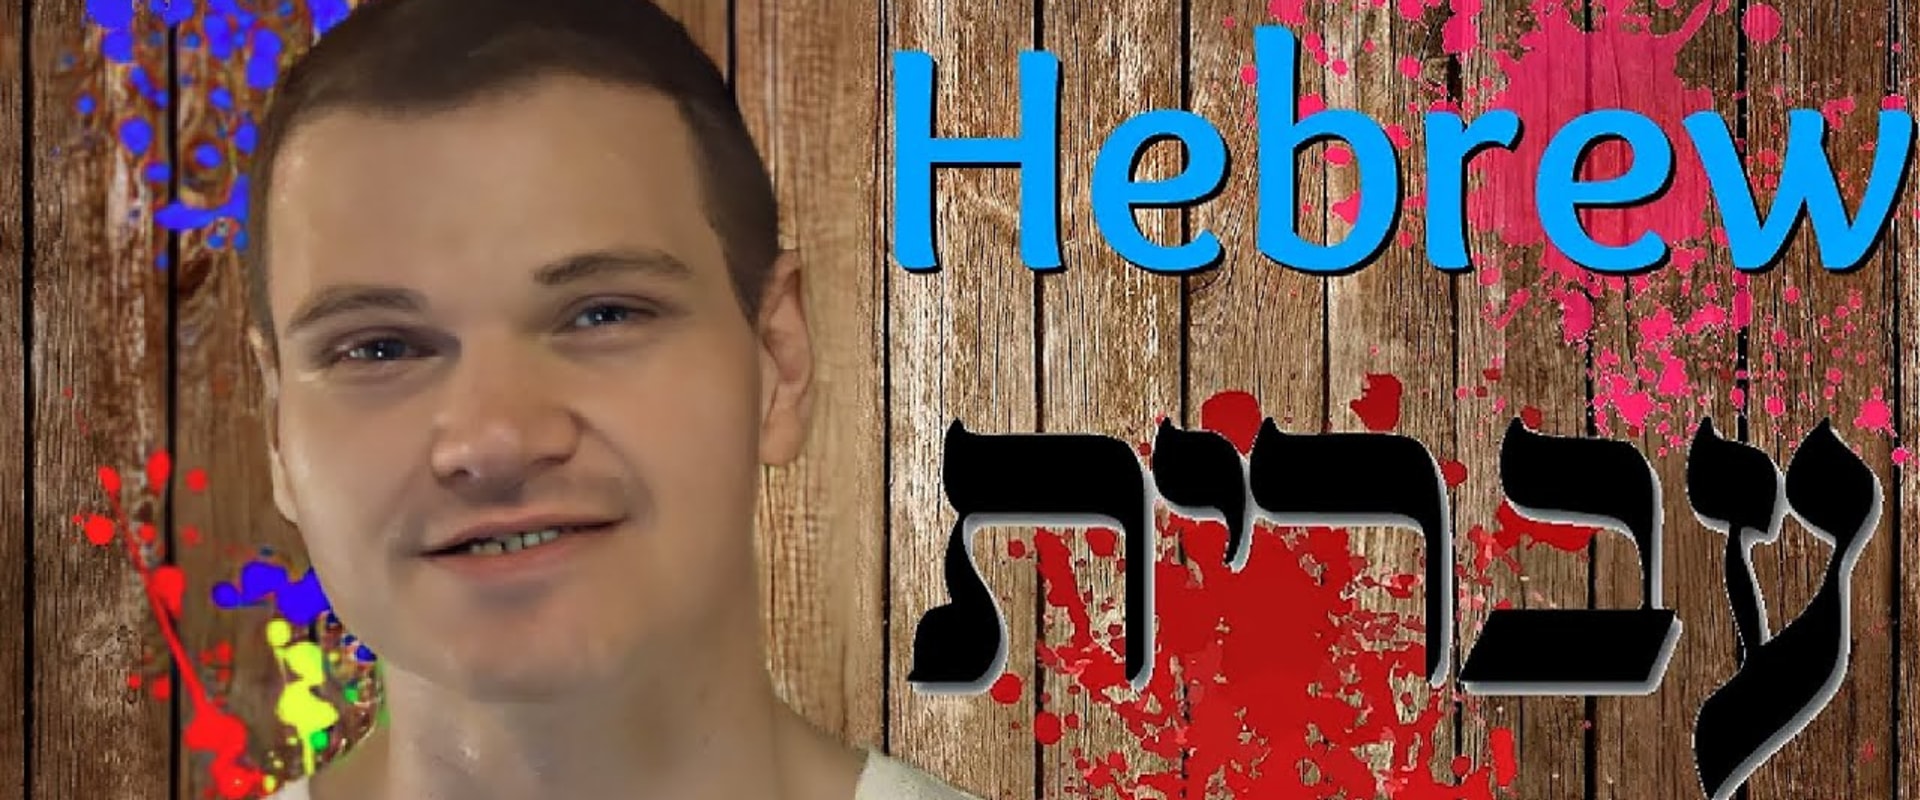 How is biblical hebrew different than modern hebrew?